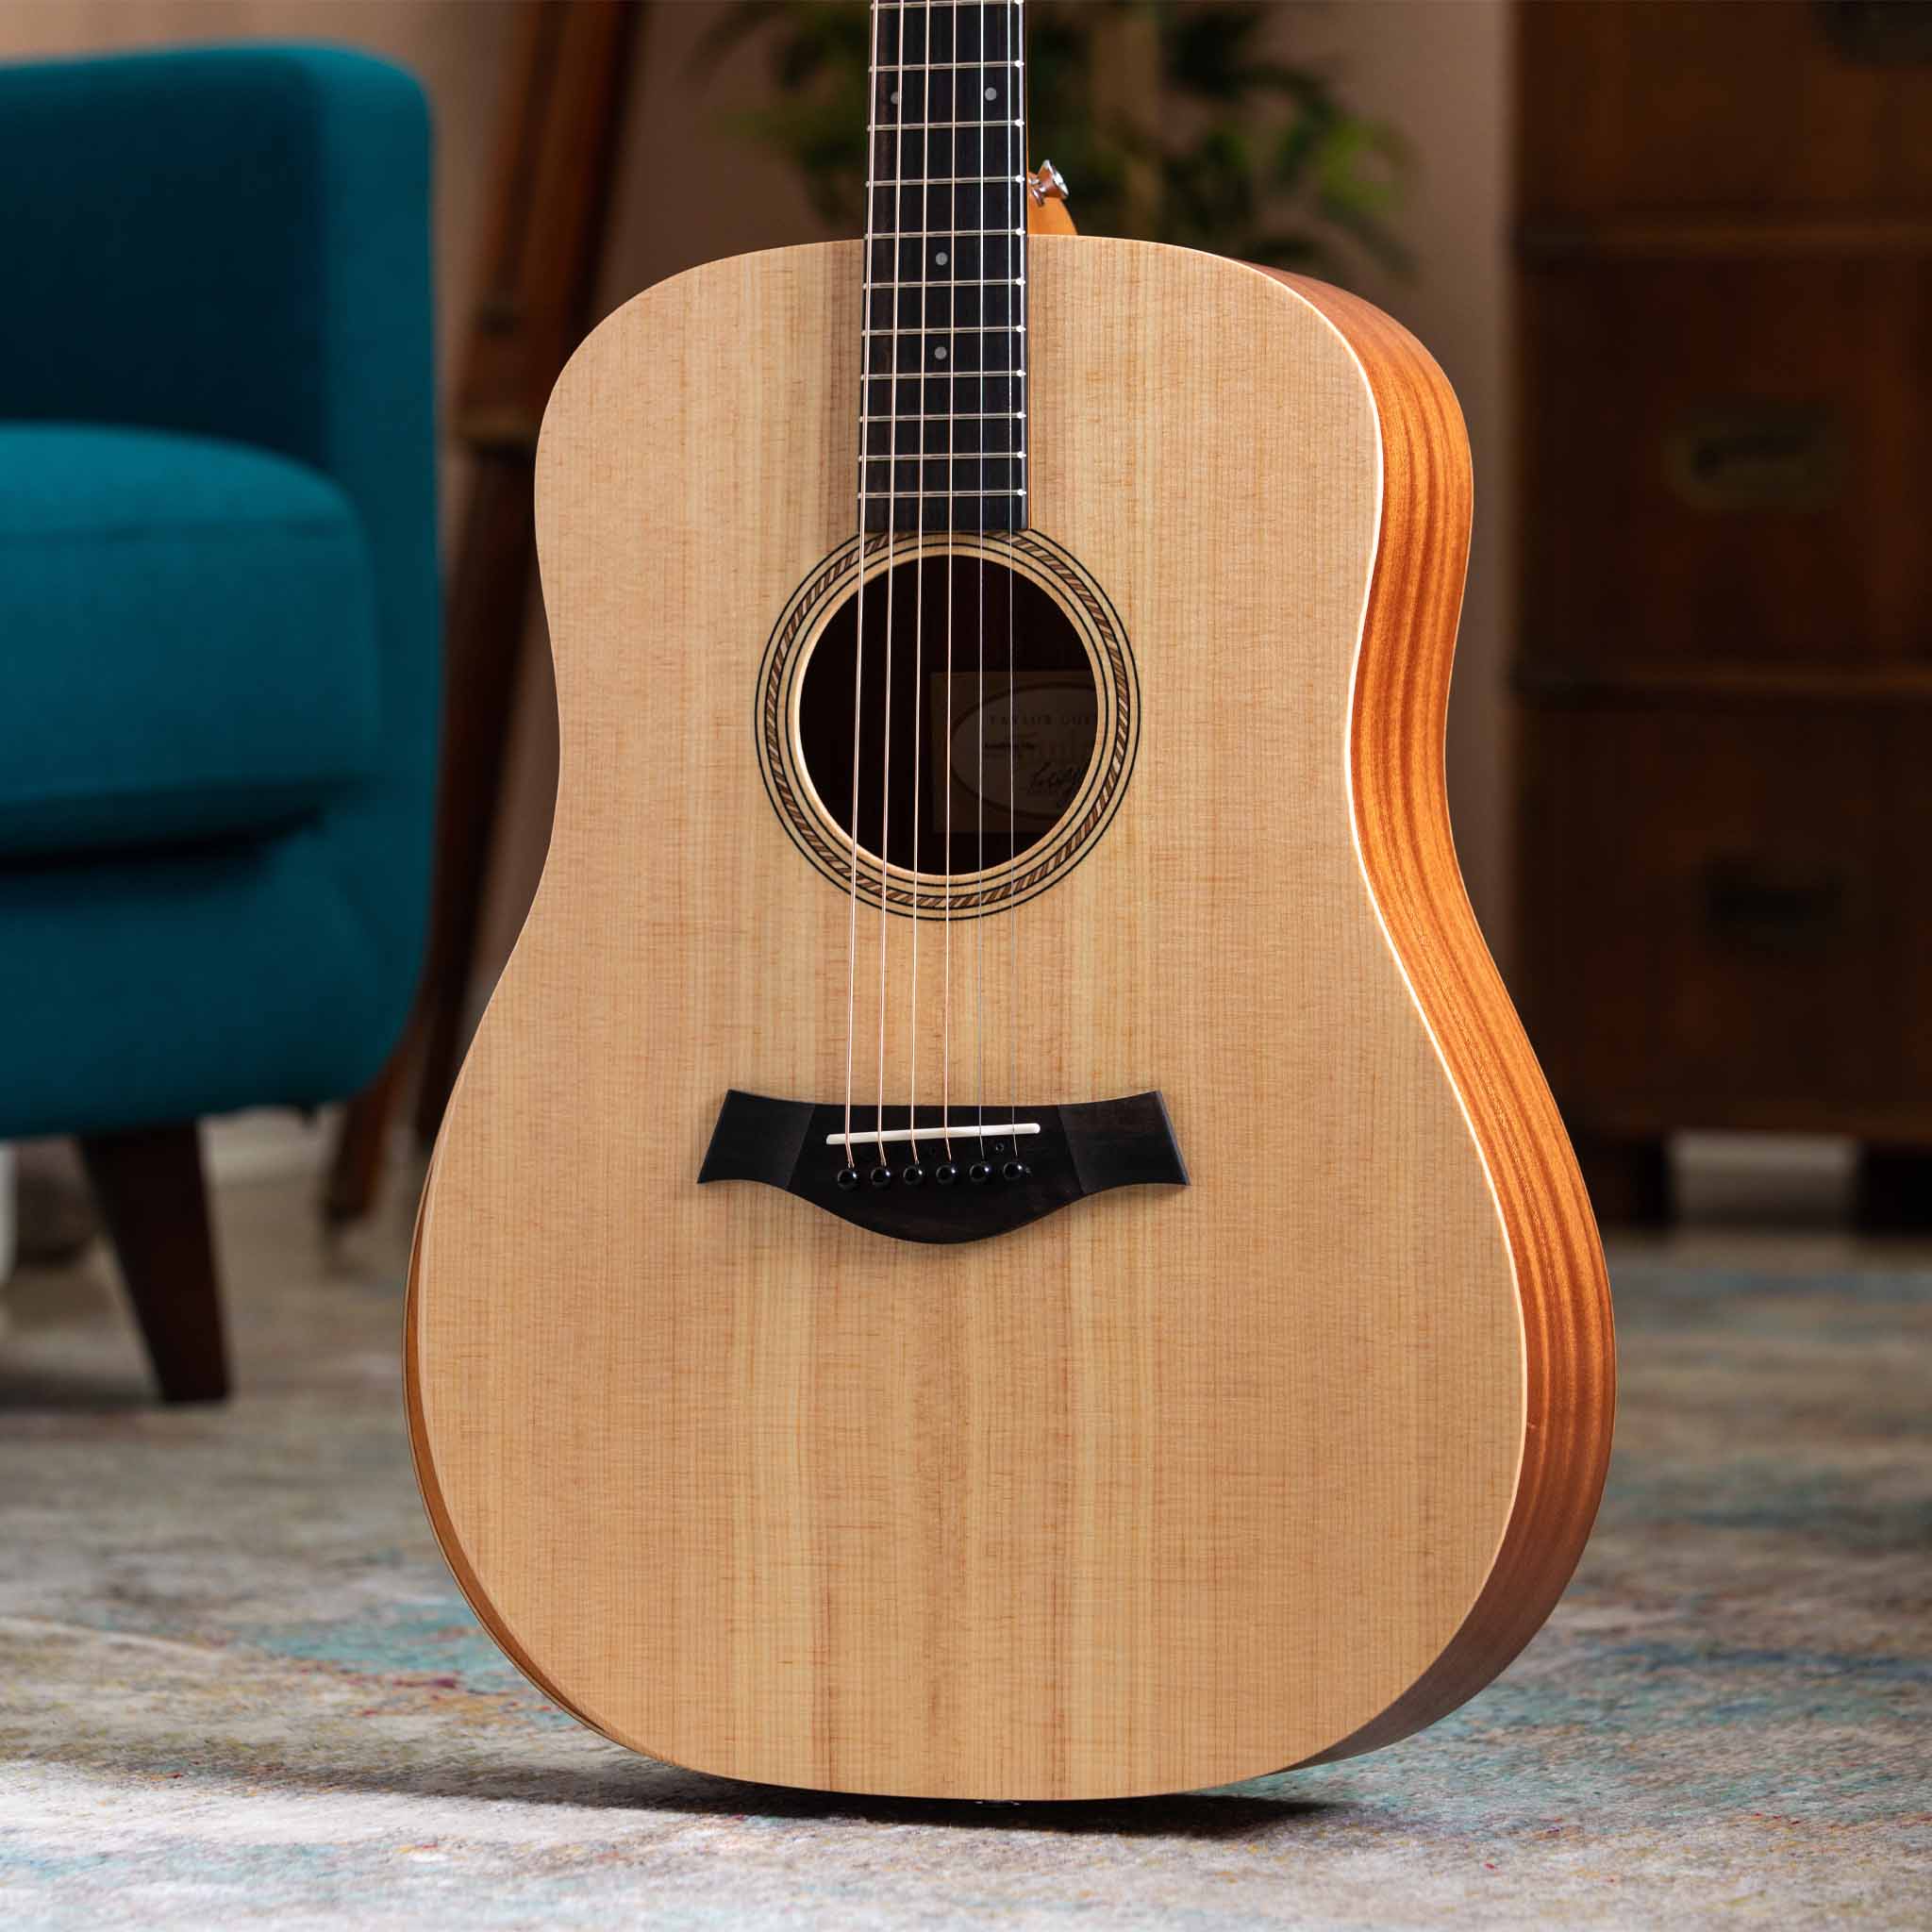 Taylor Academy 10e Layered Sapele Acoustic-Electric Guitar